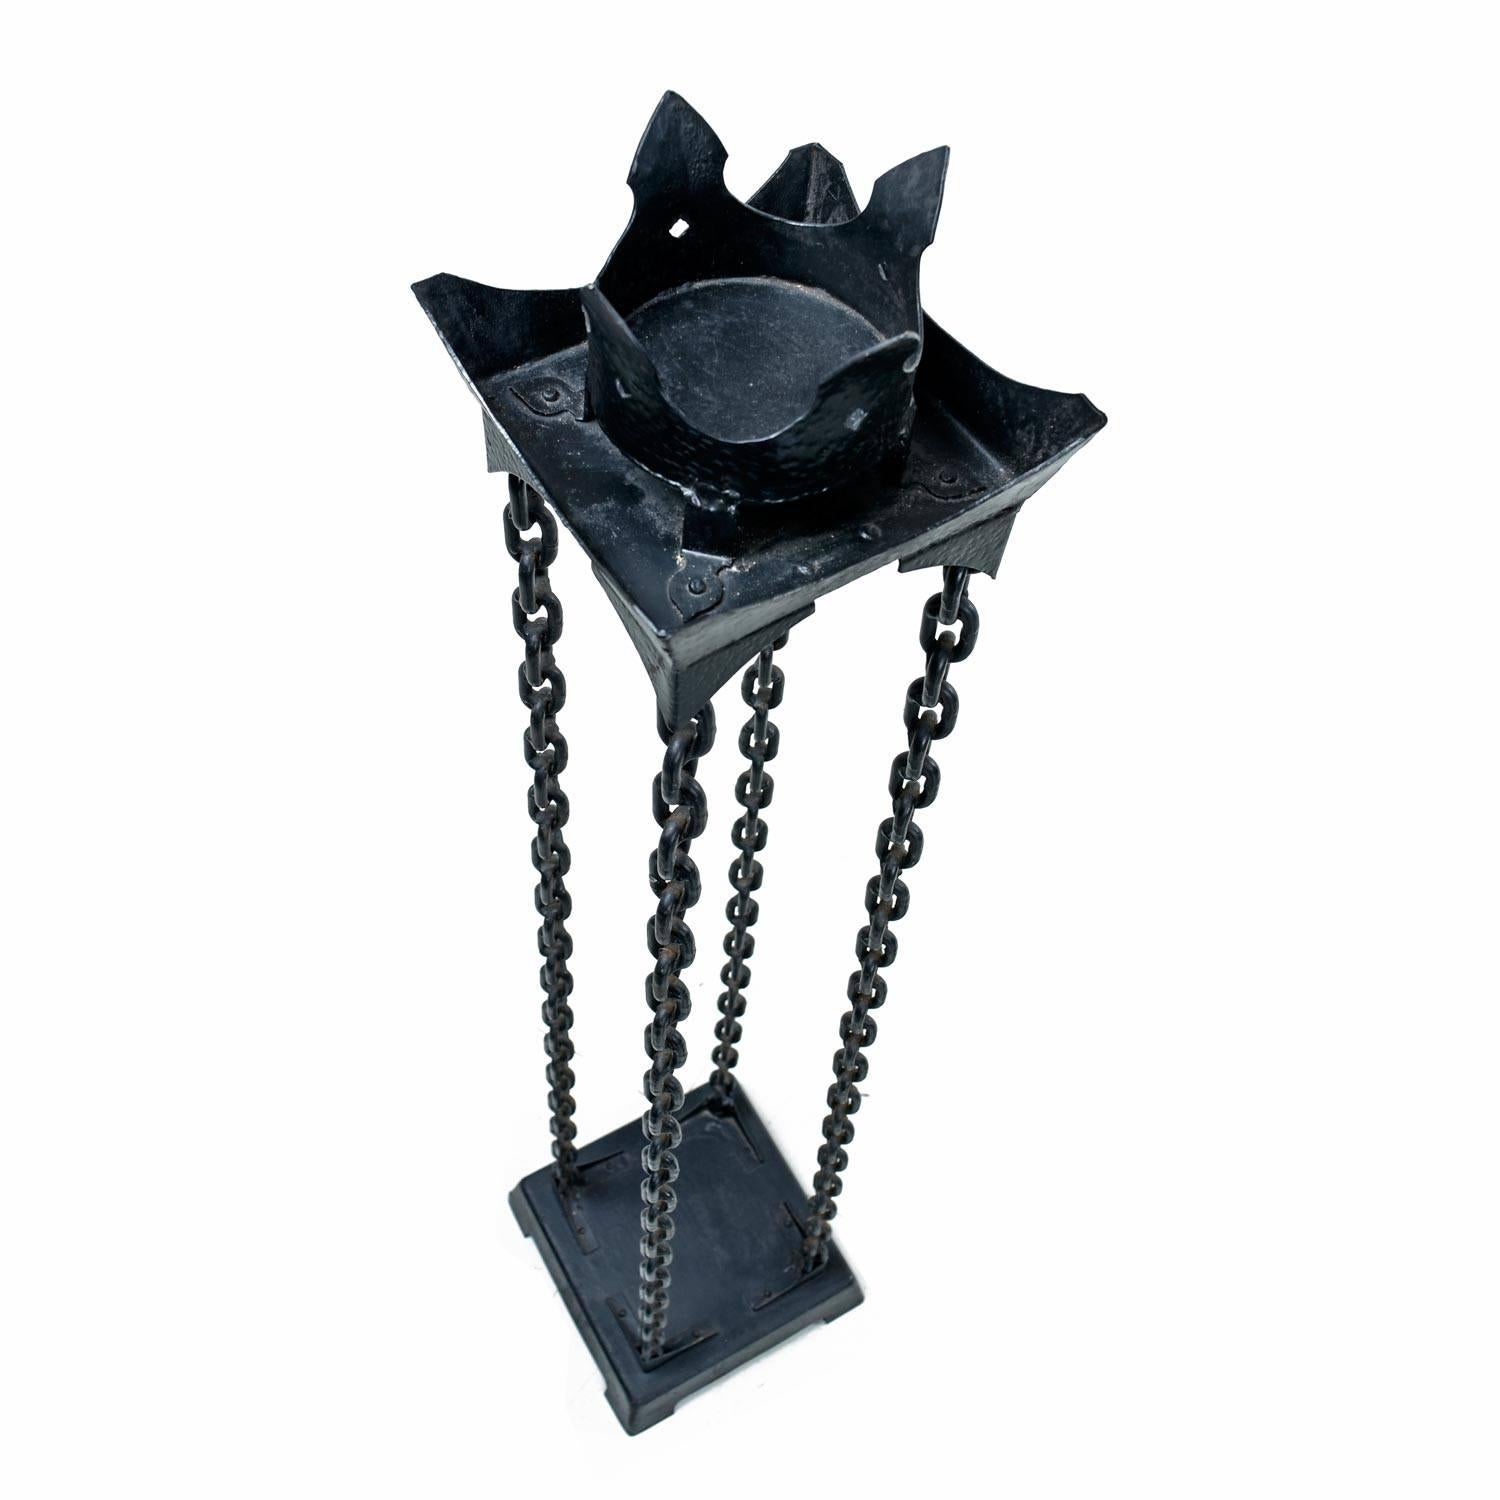 Imagine how amazing these torchiere's will look as the red candles Cascade and dry over the chain links. No vampires home is complete without these statement pieces. Perfect for book-ending a thrown chair, flaking a bed, illuminating a library or